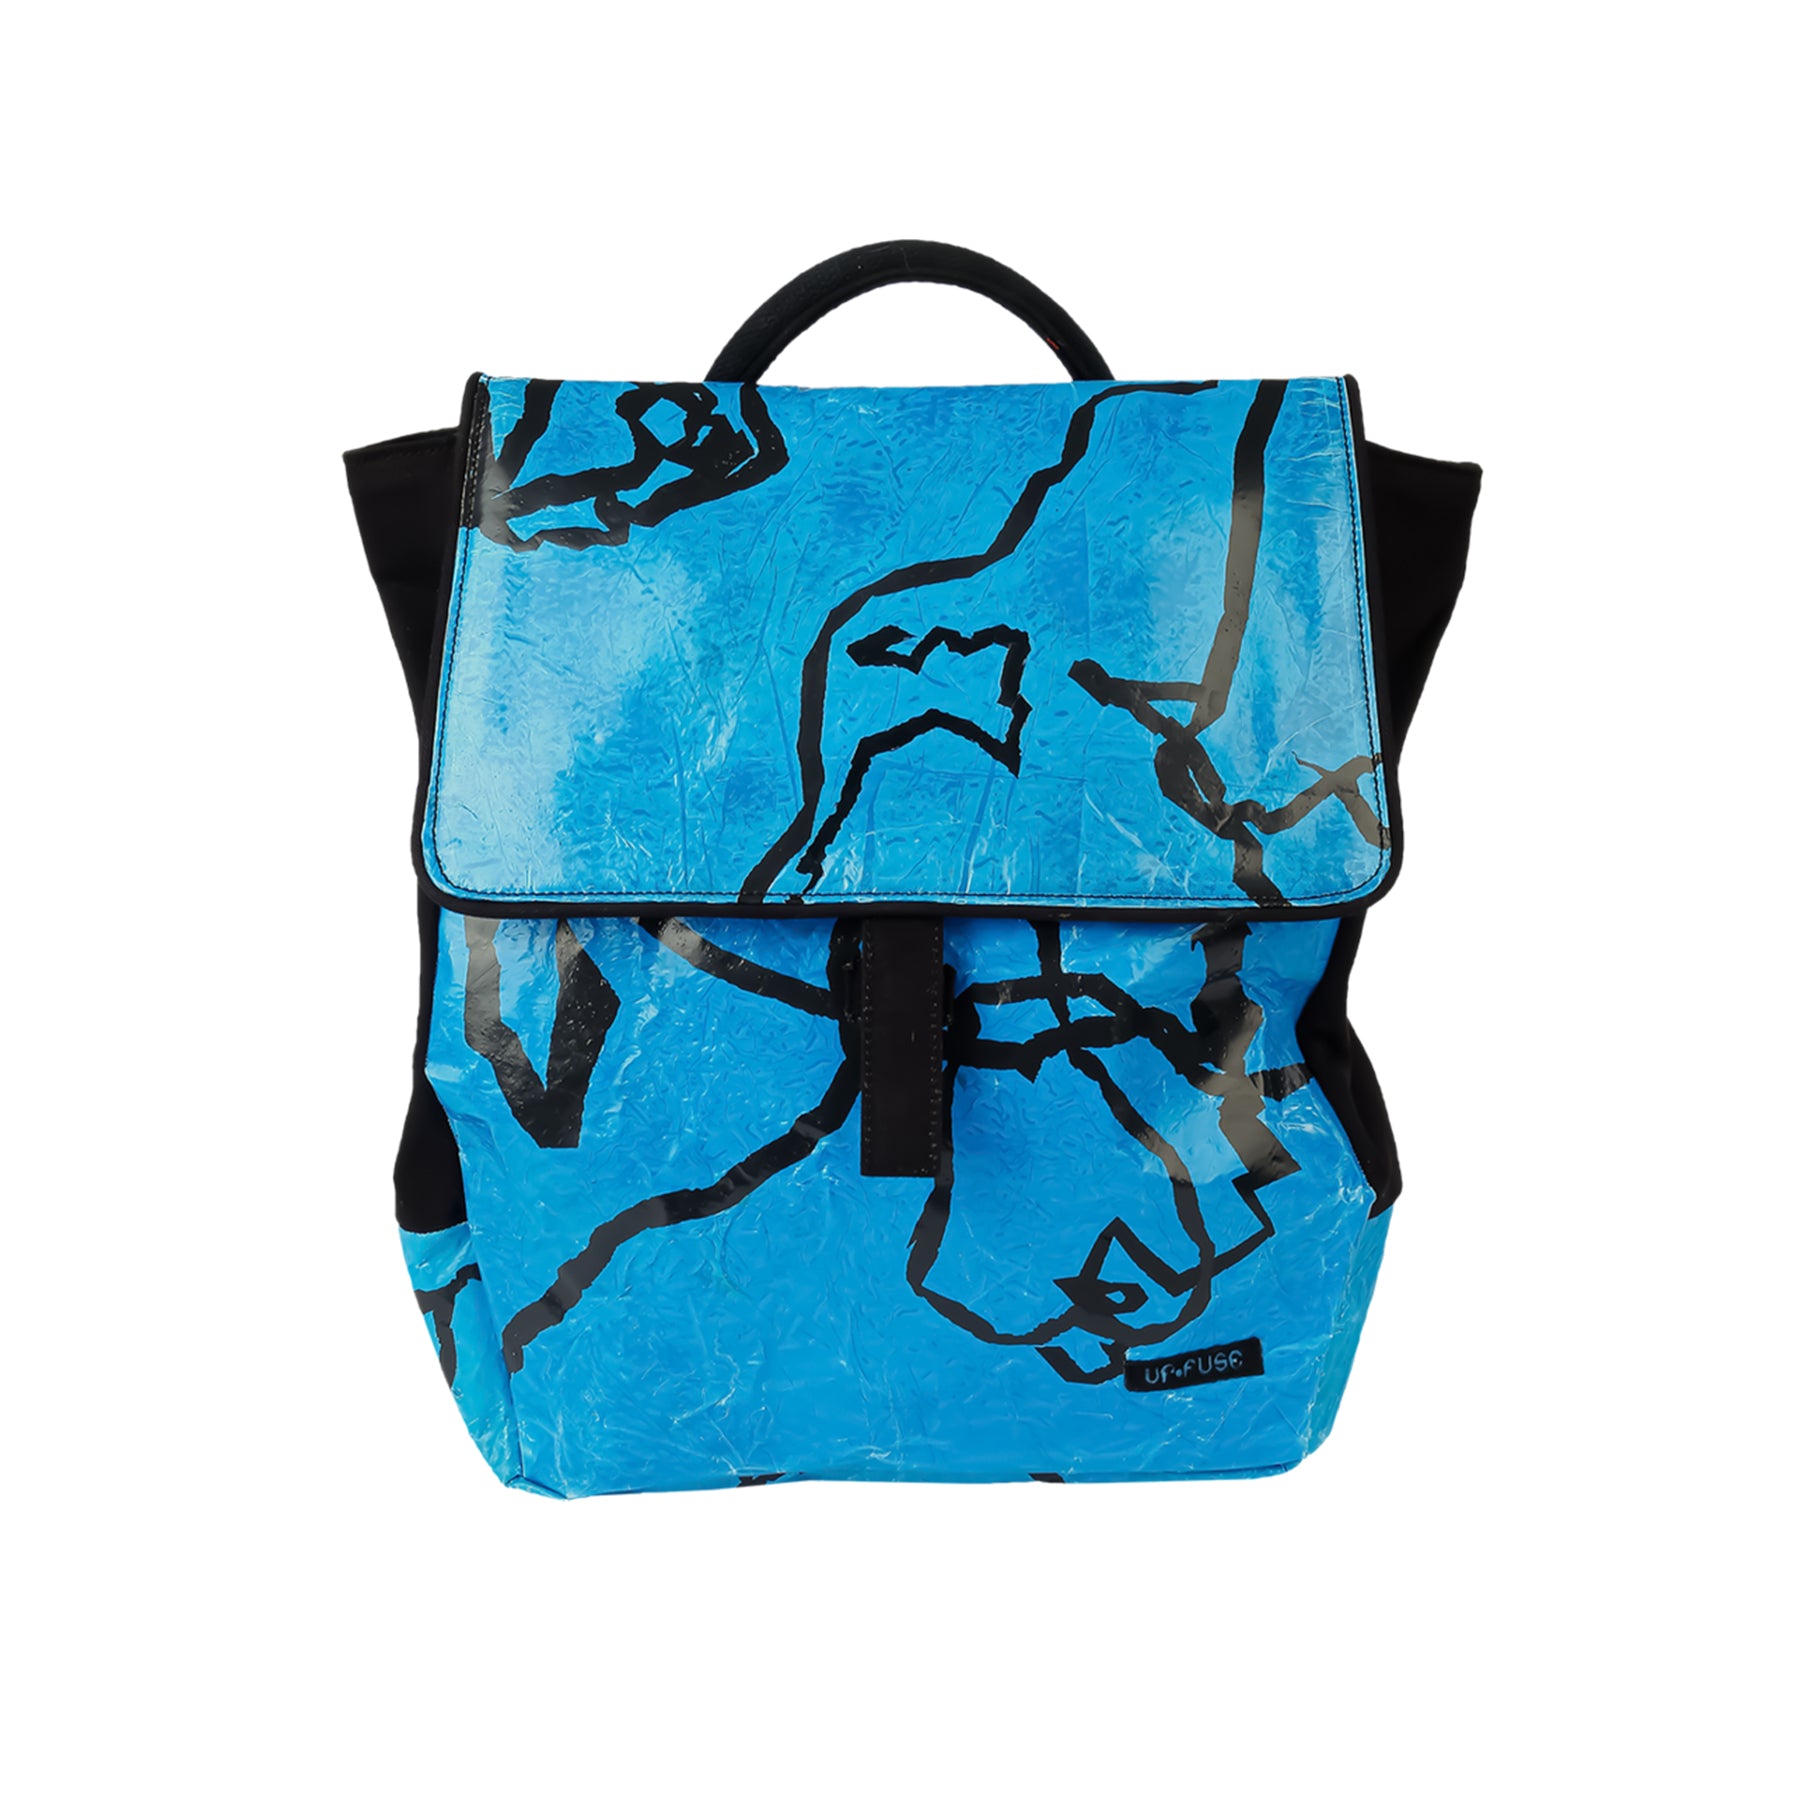 City Twin backpack with black confetti on blue background